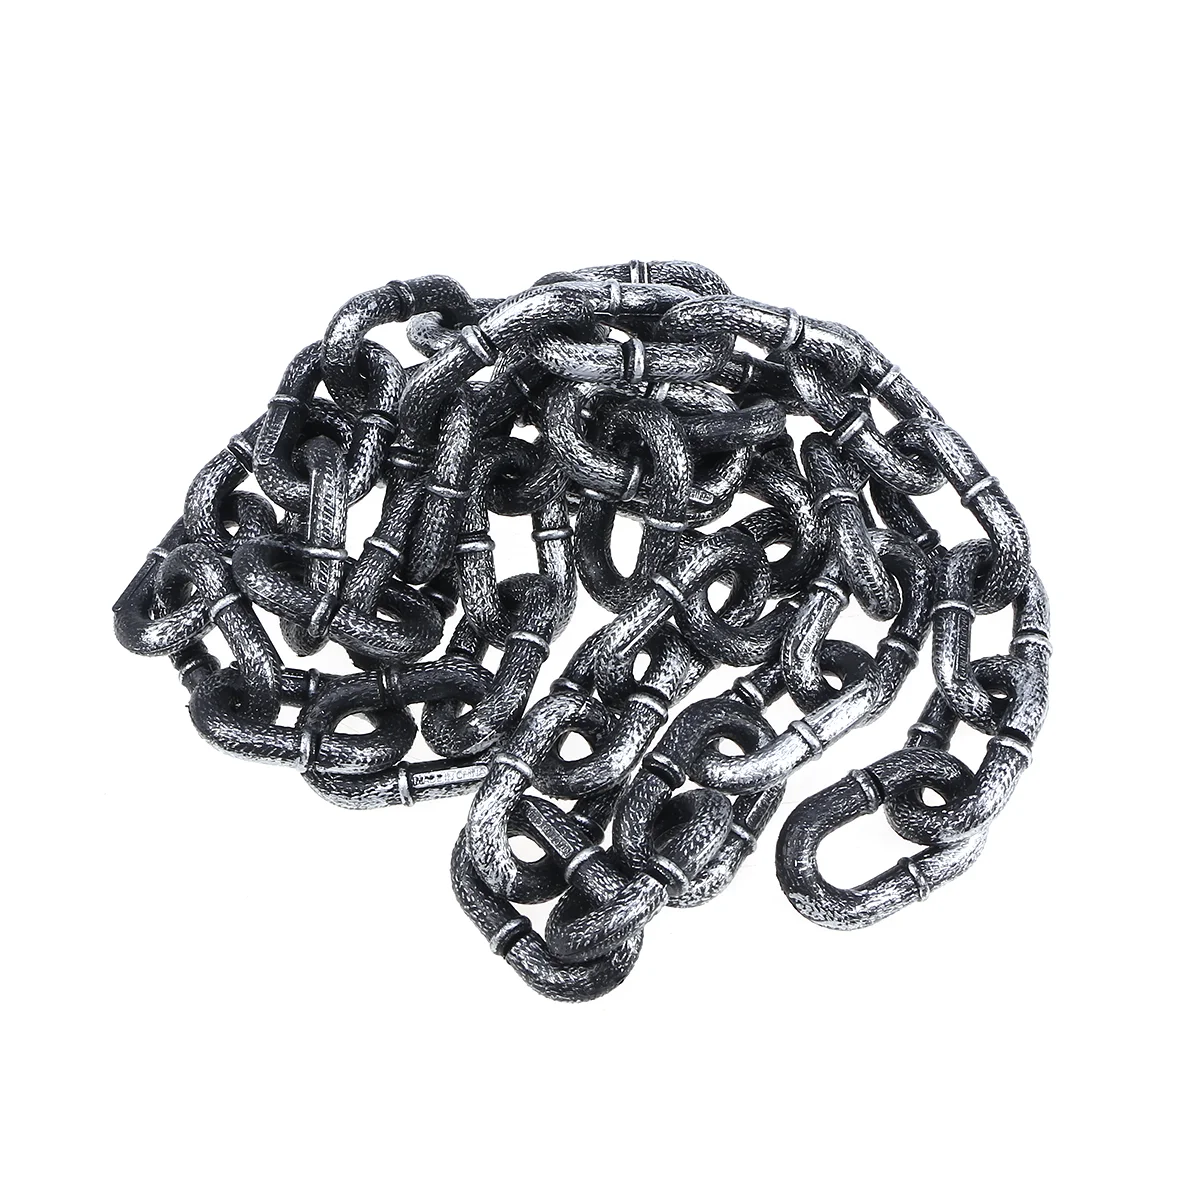 Chain Halloween Costume Plastic Shackles Barrier Decorative Fake Prisoner Prop Halloween Performance Stage Props Chains Props